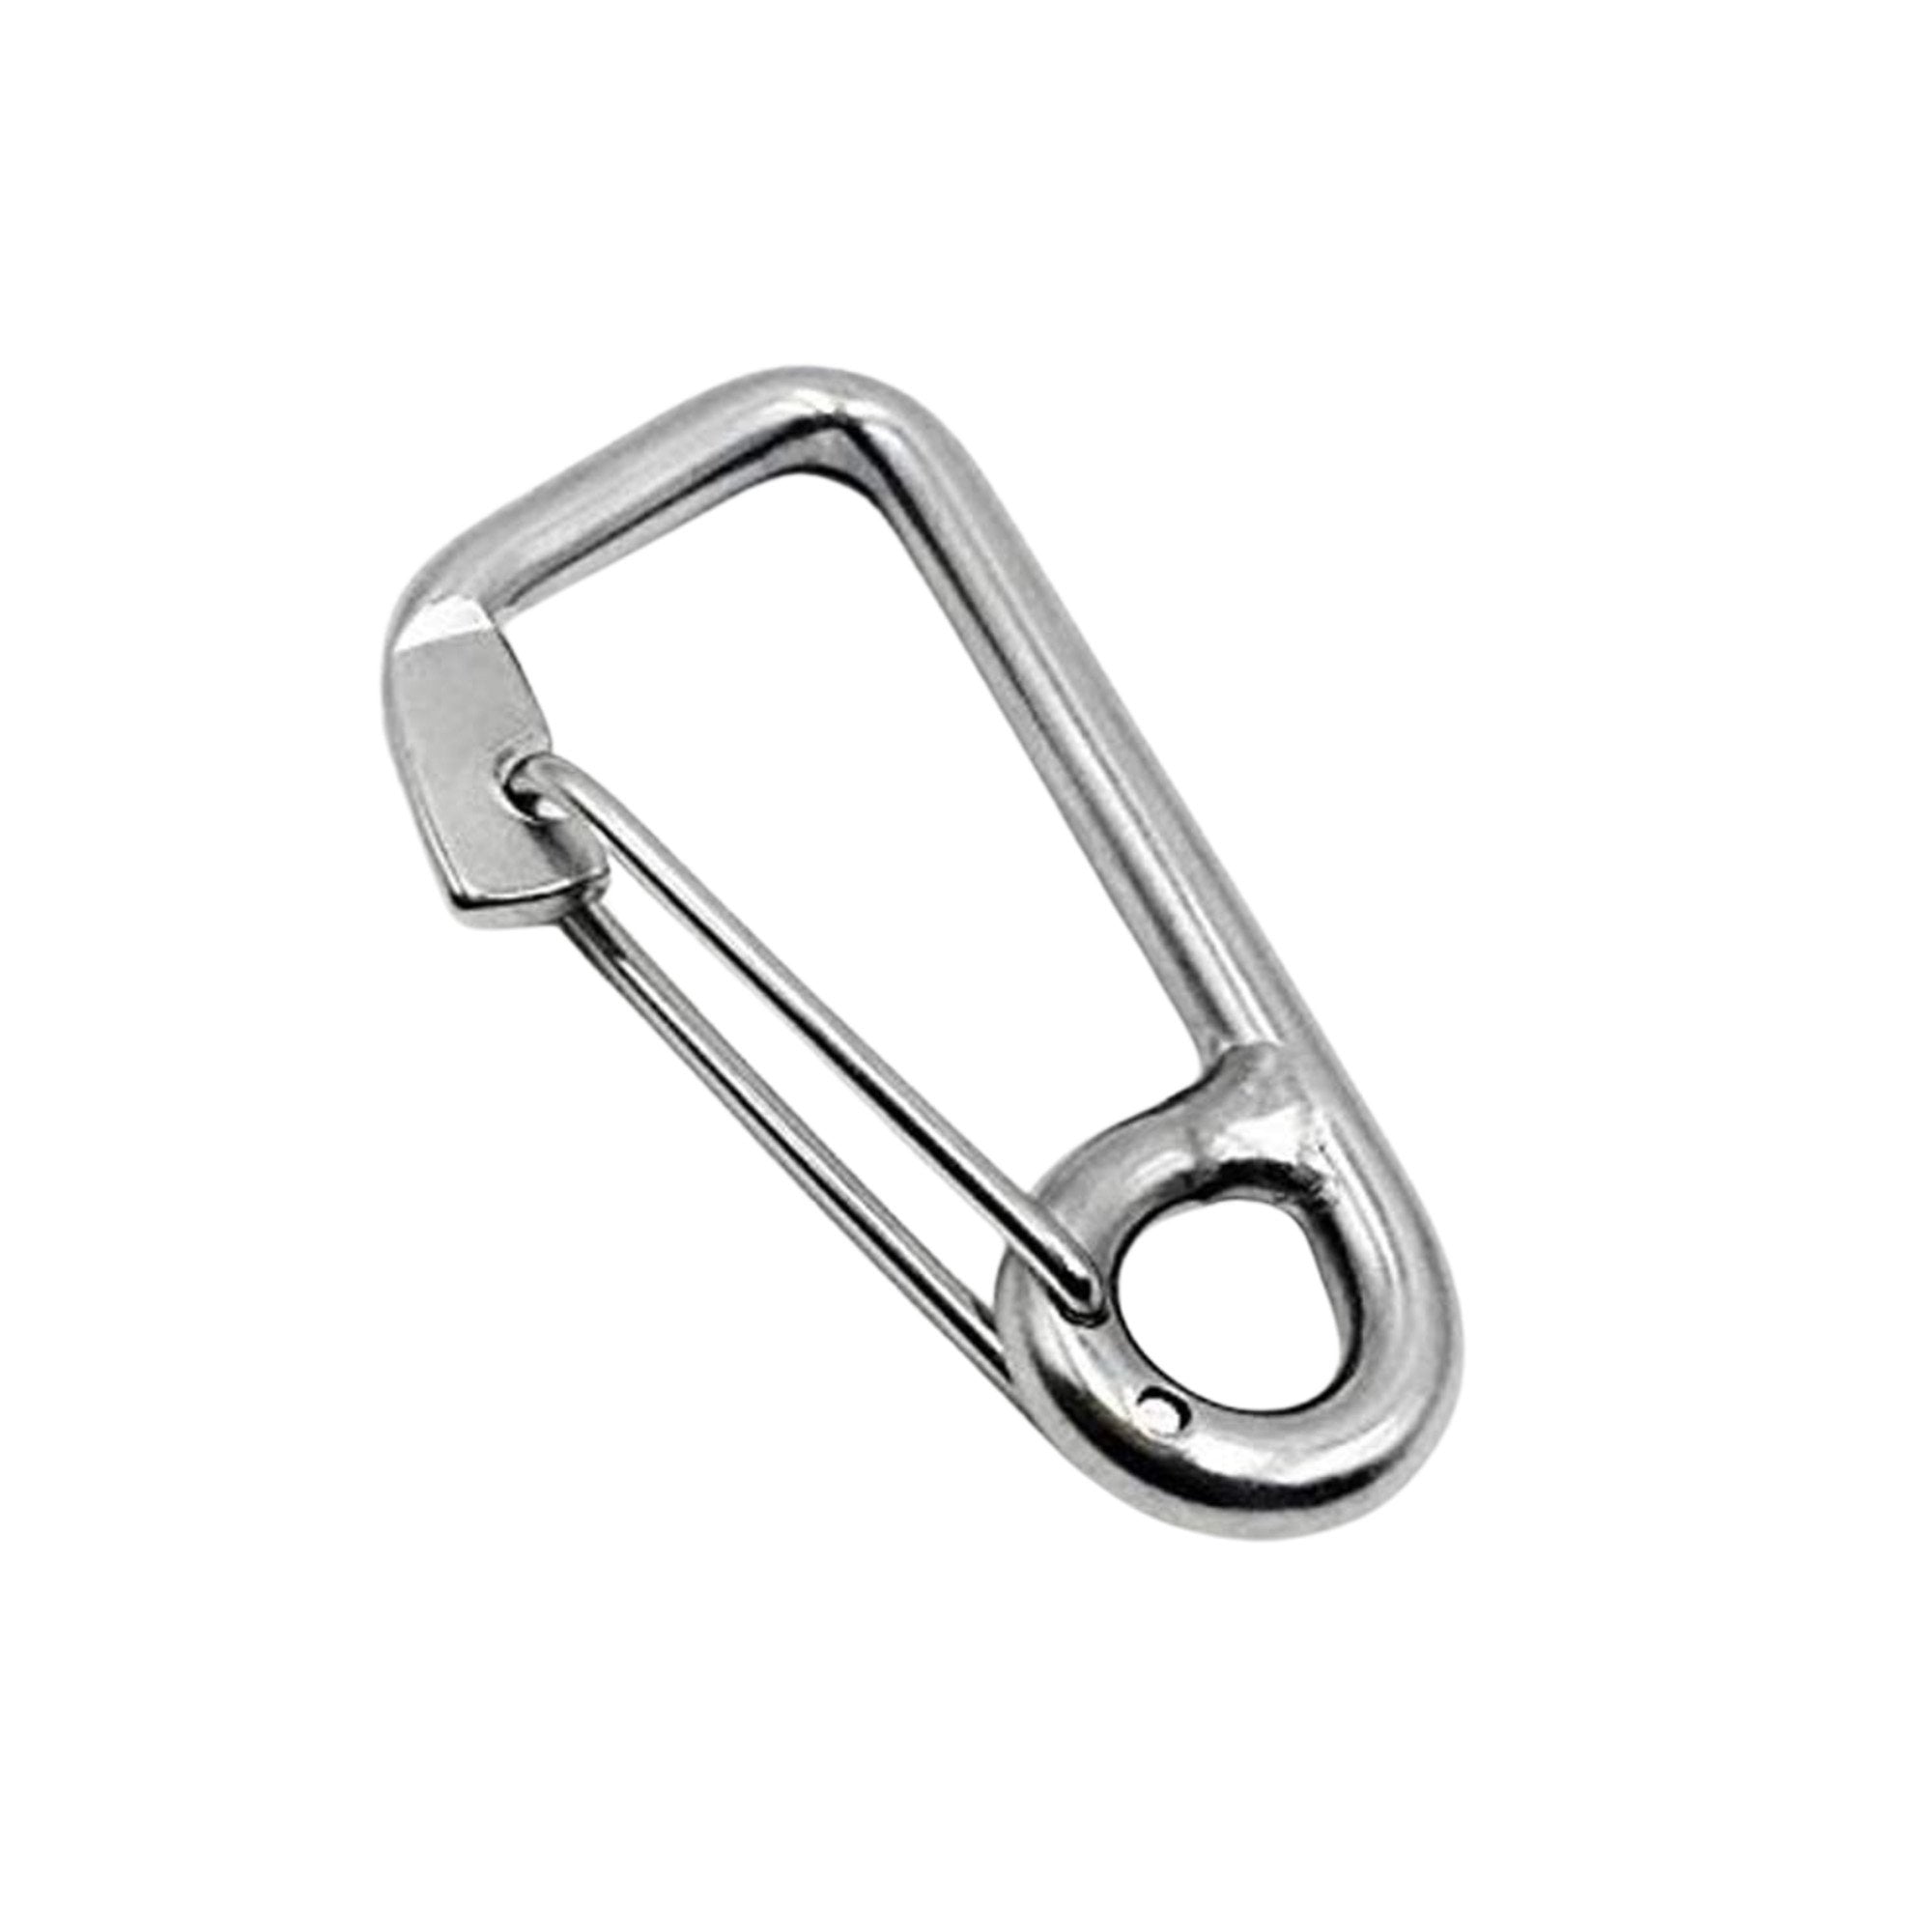 Marine City 316 Grade Stainless Steel Carabiner Spring Snap Hook with Ring 2 Inches for Climbing Fishing Hiking (Pack of 1)